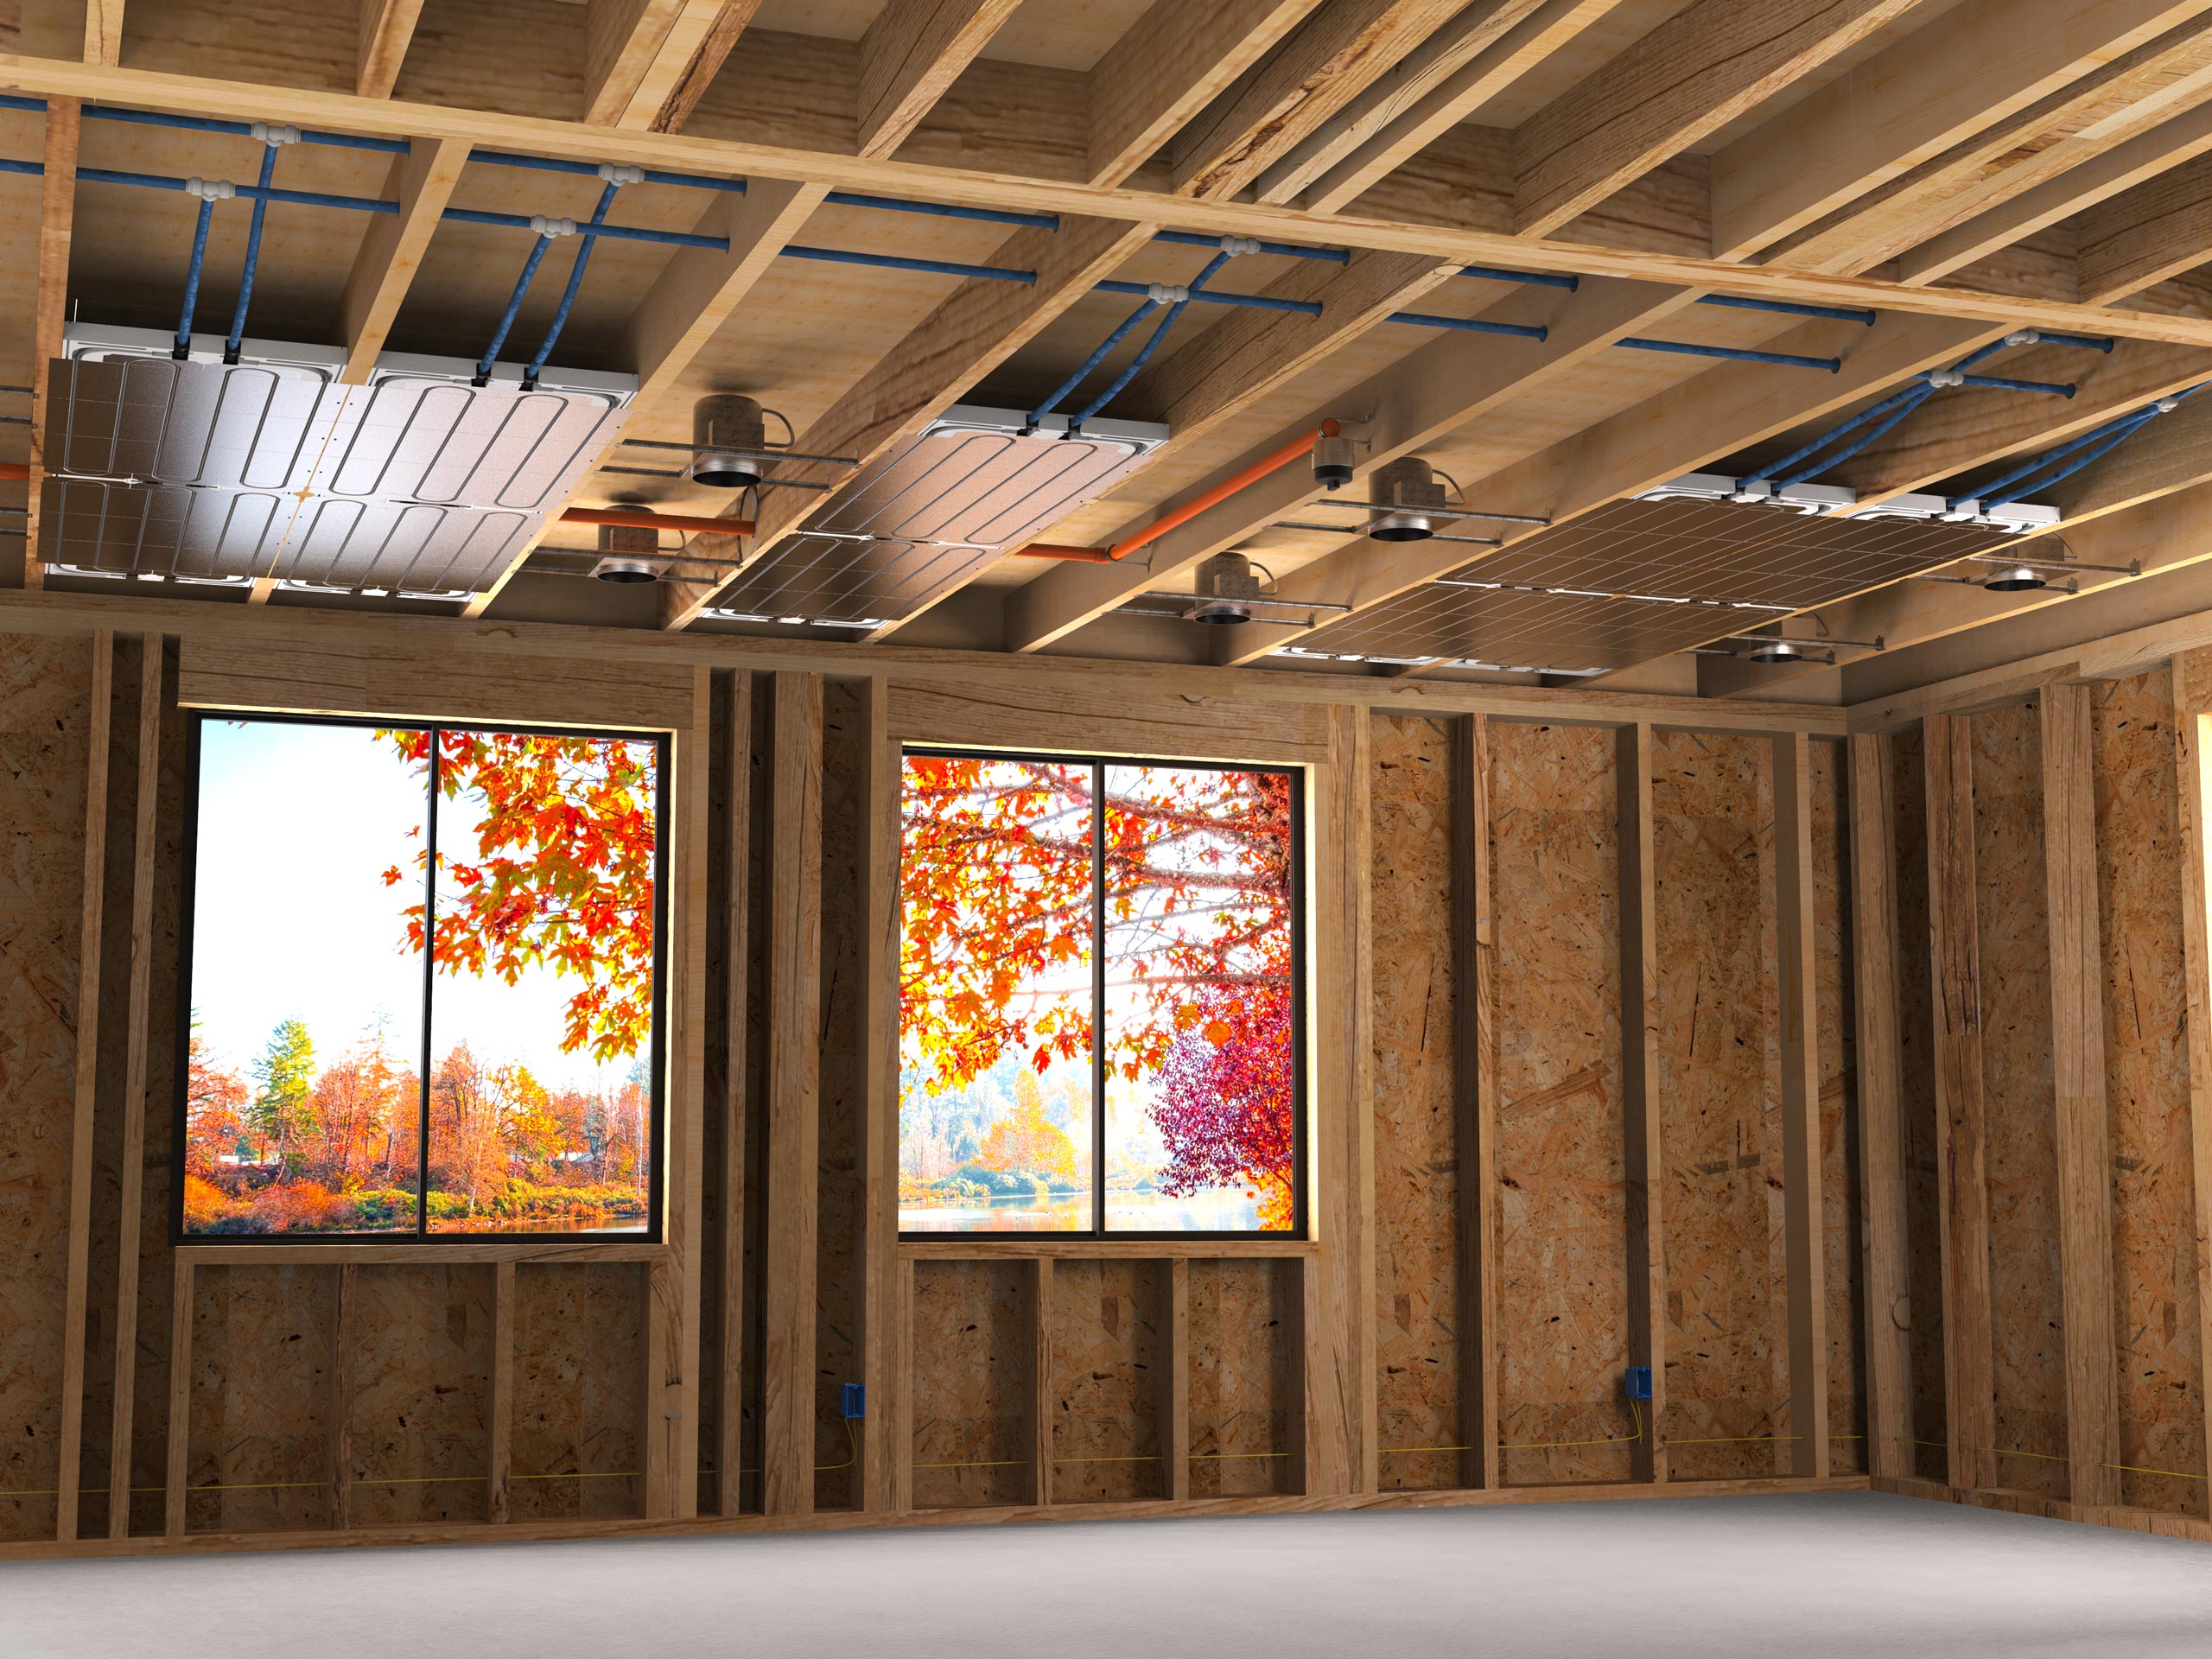 Ray Magic radiant ceiling panels installed within ceiling joists.